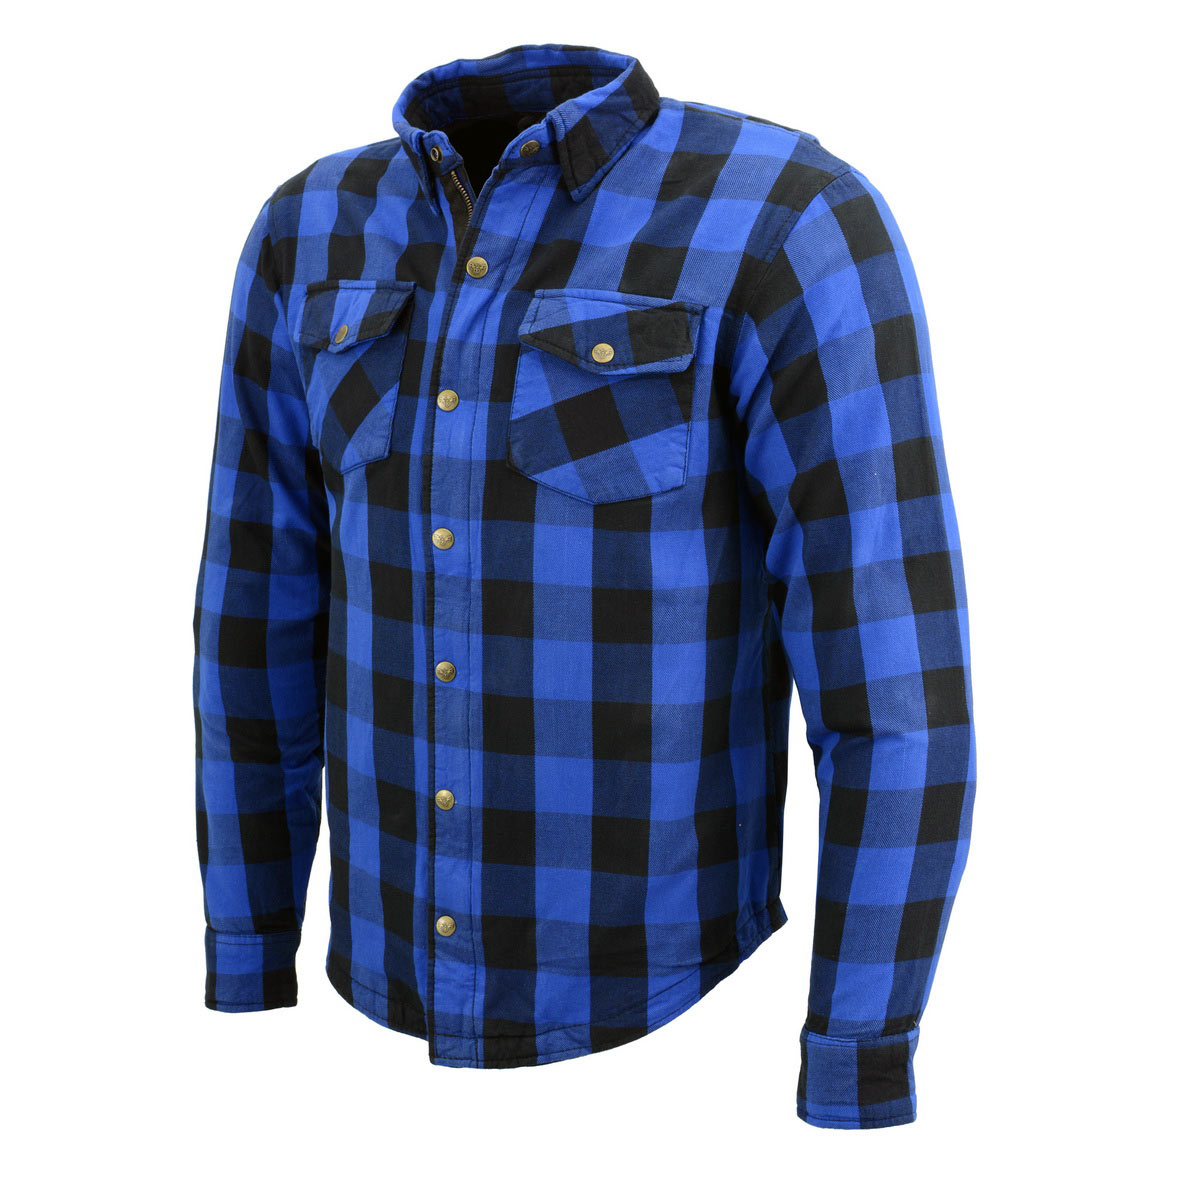 Milwaukee Leather MPM1634 Men's Plaid Flannel Biker Shirt with CE Approved Armor - Reinforced w/ Aramid Fiber